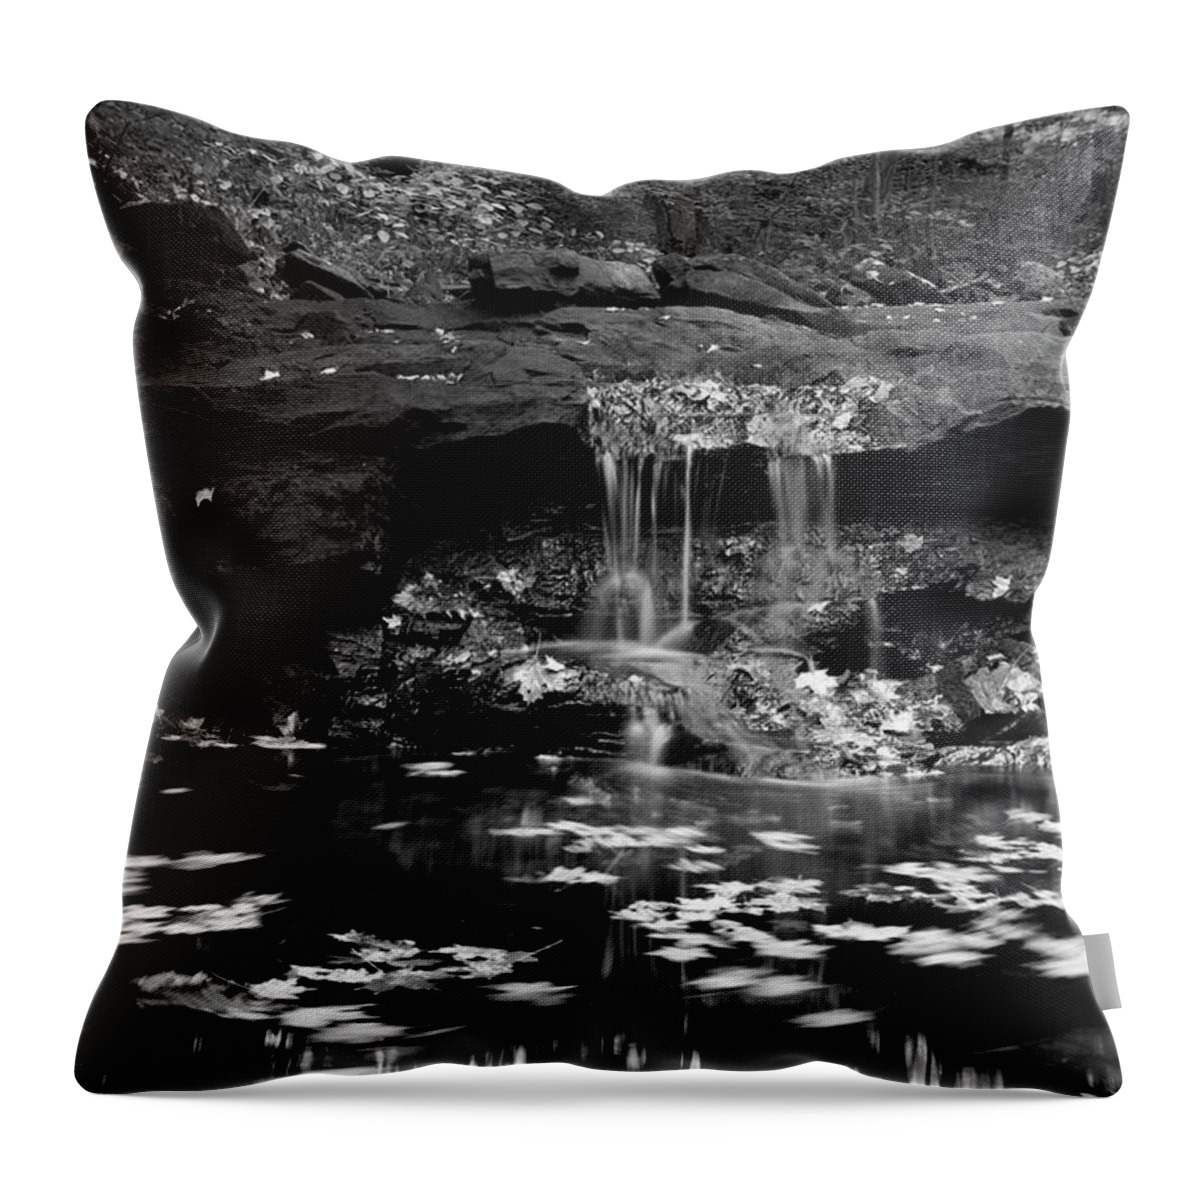 Waterfall Throw Pillow featuring the photograph Low Falls by Jeff Severson